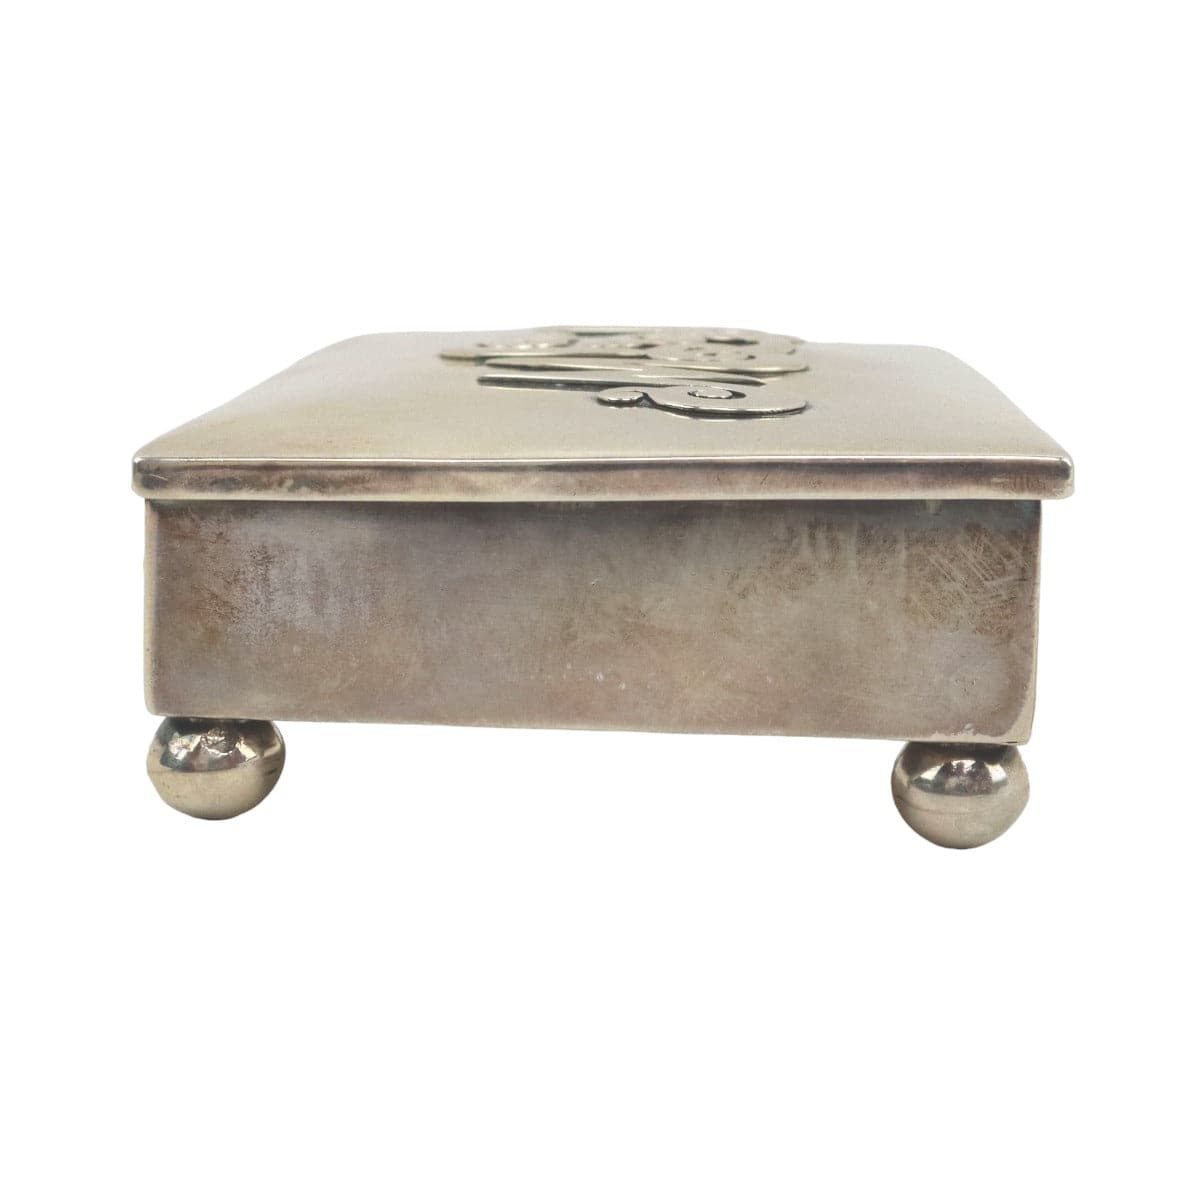 Frank Patania Sr. (1898-1964) - Sterling Silver Lidded Box with "MCM" Initials c. 1950s, 1.5" x 5.5" x 3.75" (J91699-1022-014) 3